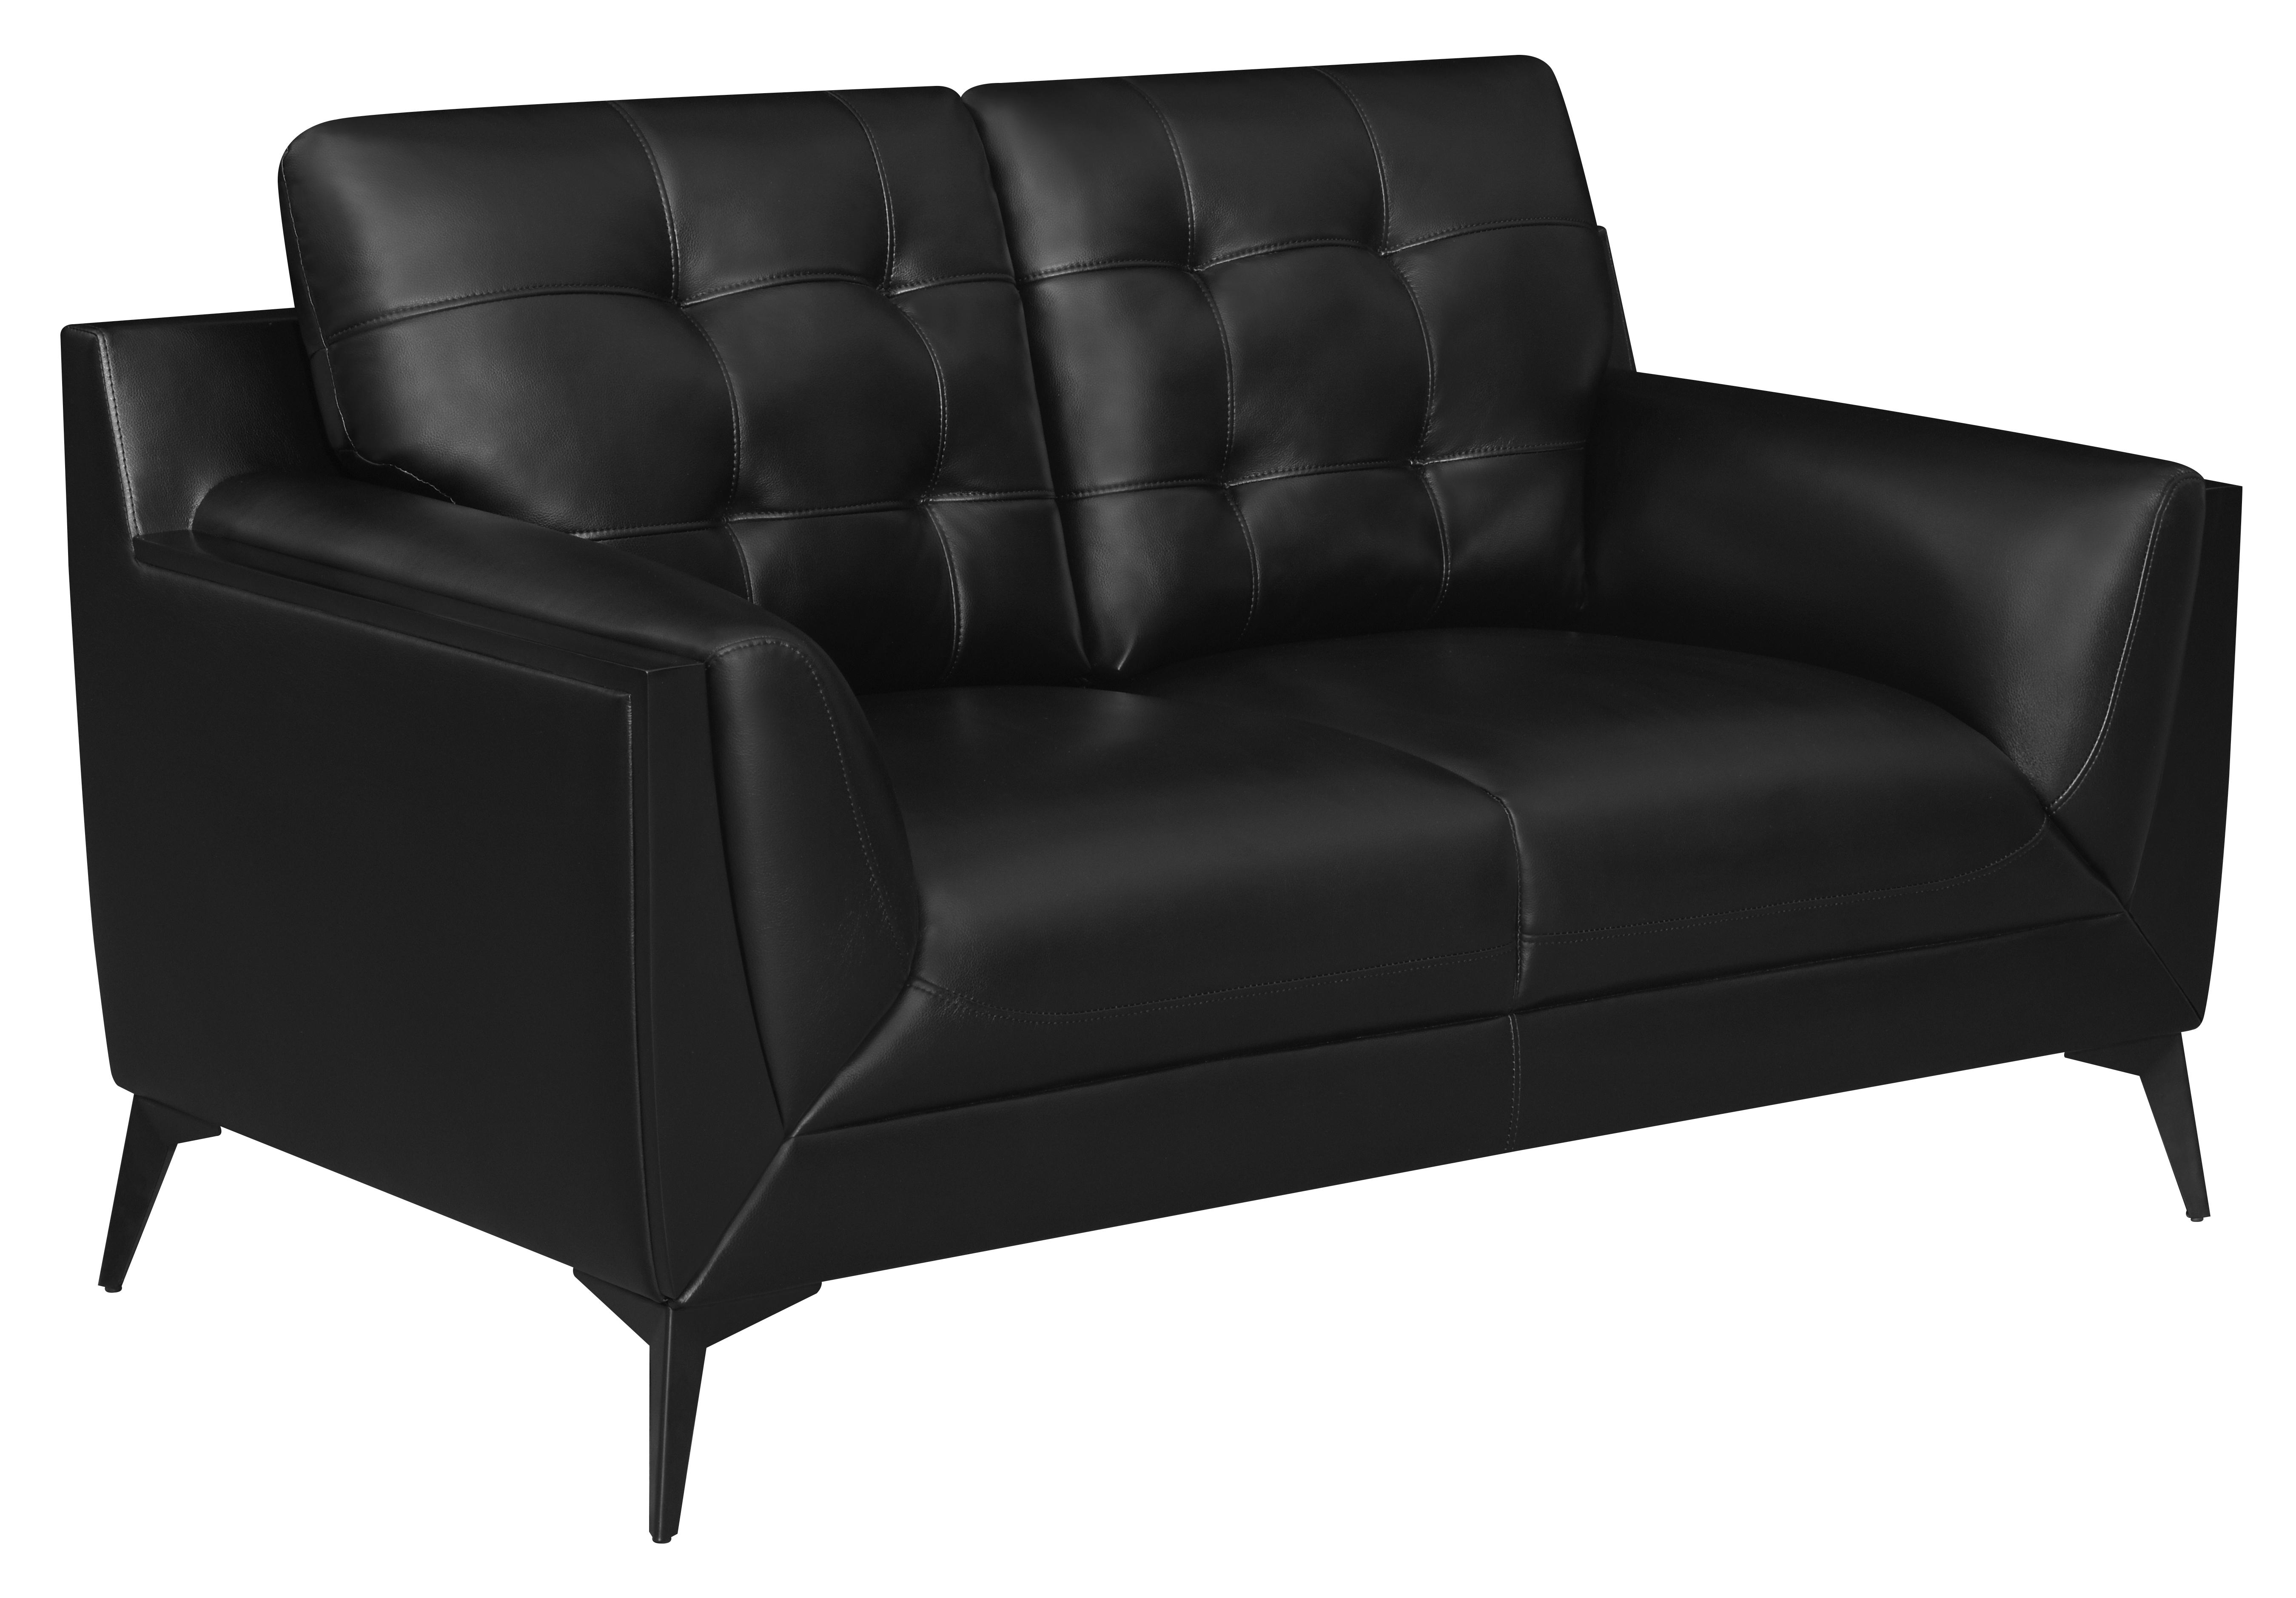 Contemporary Loveseat 511132 Moira 511132 in Black Leatherette